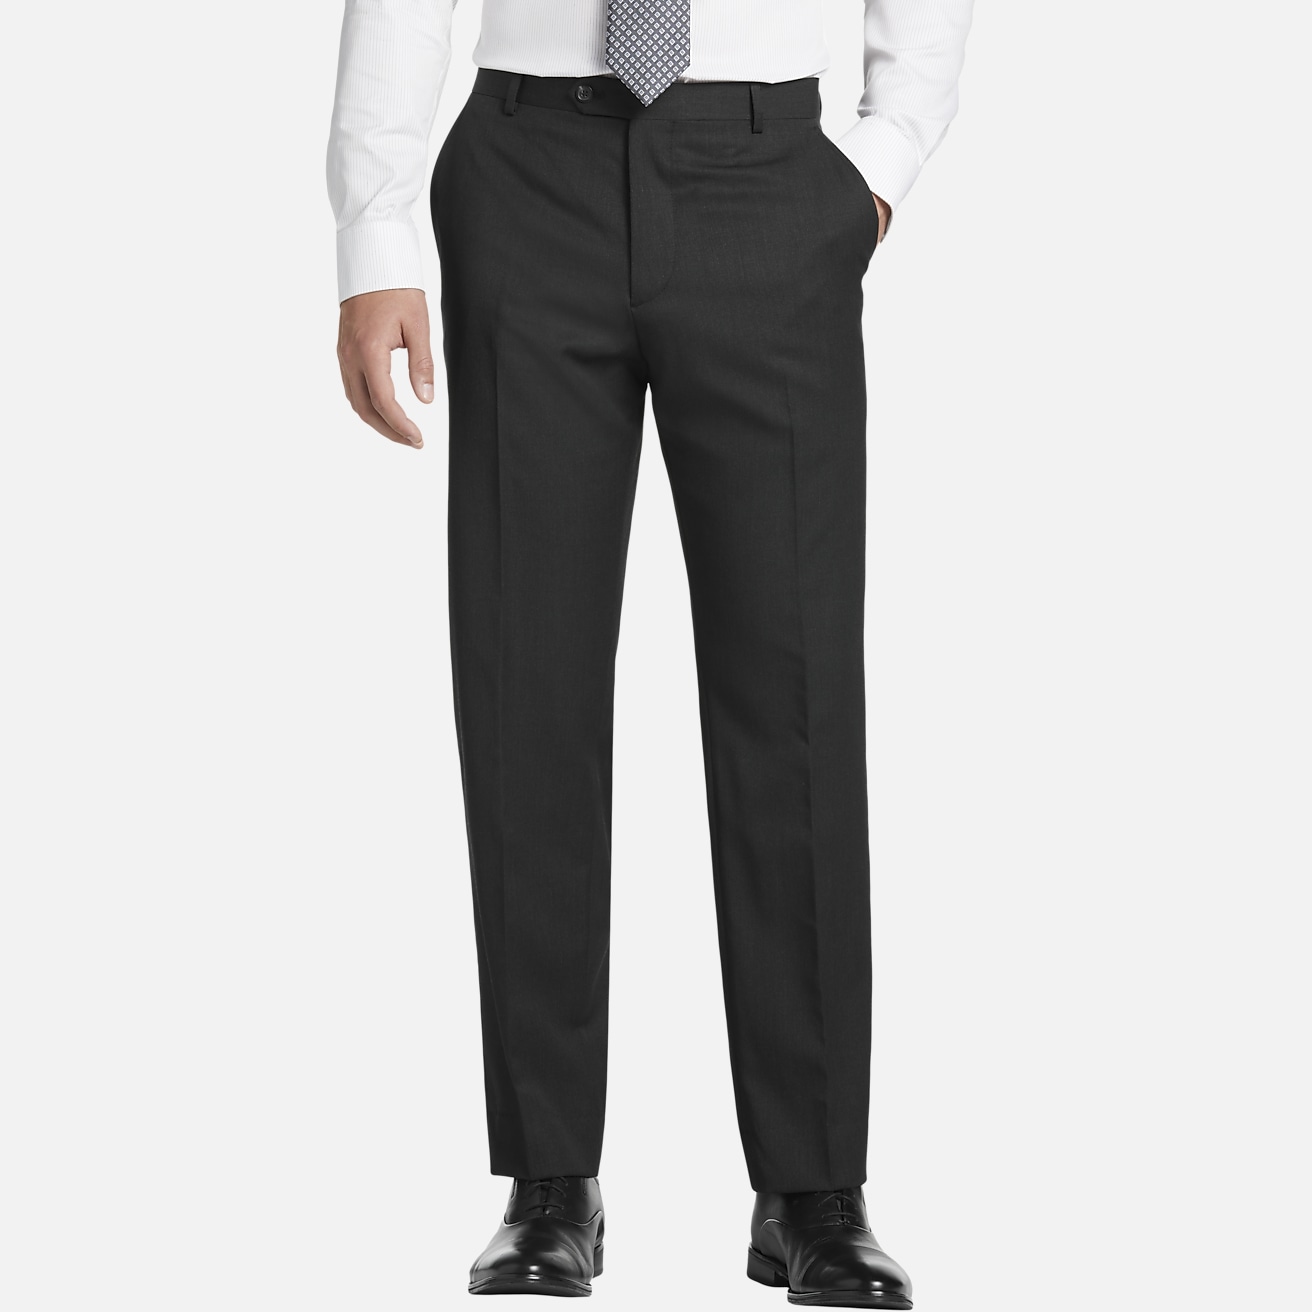 https://image.menswearhouse.com/is/image/TMW/TMW_3VZ2_17_PRONTO_UOMO_PLATINUM_SUIT_SEPARATE_PANTS_CHARCOAL_GRAY_MAIN?imPolicy=pdp-mob-2x